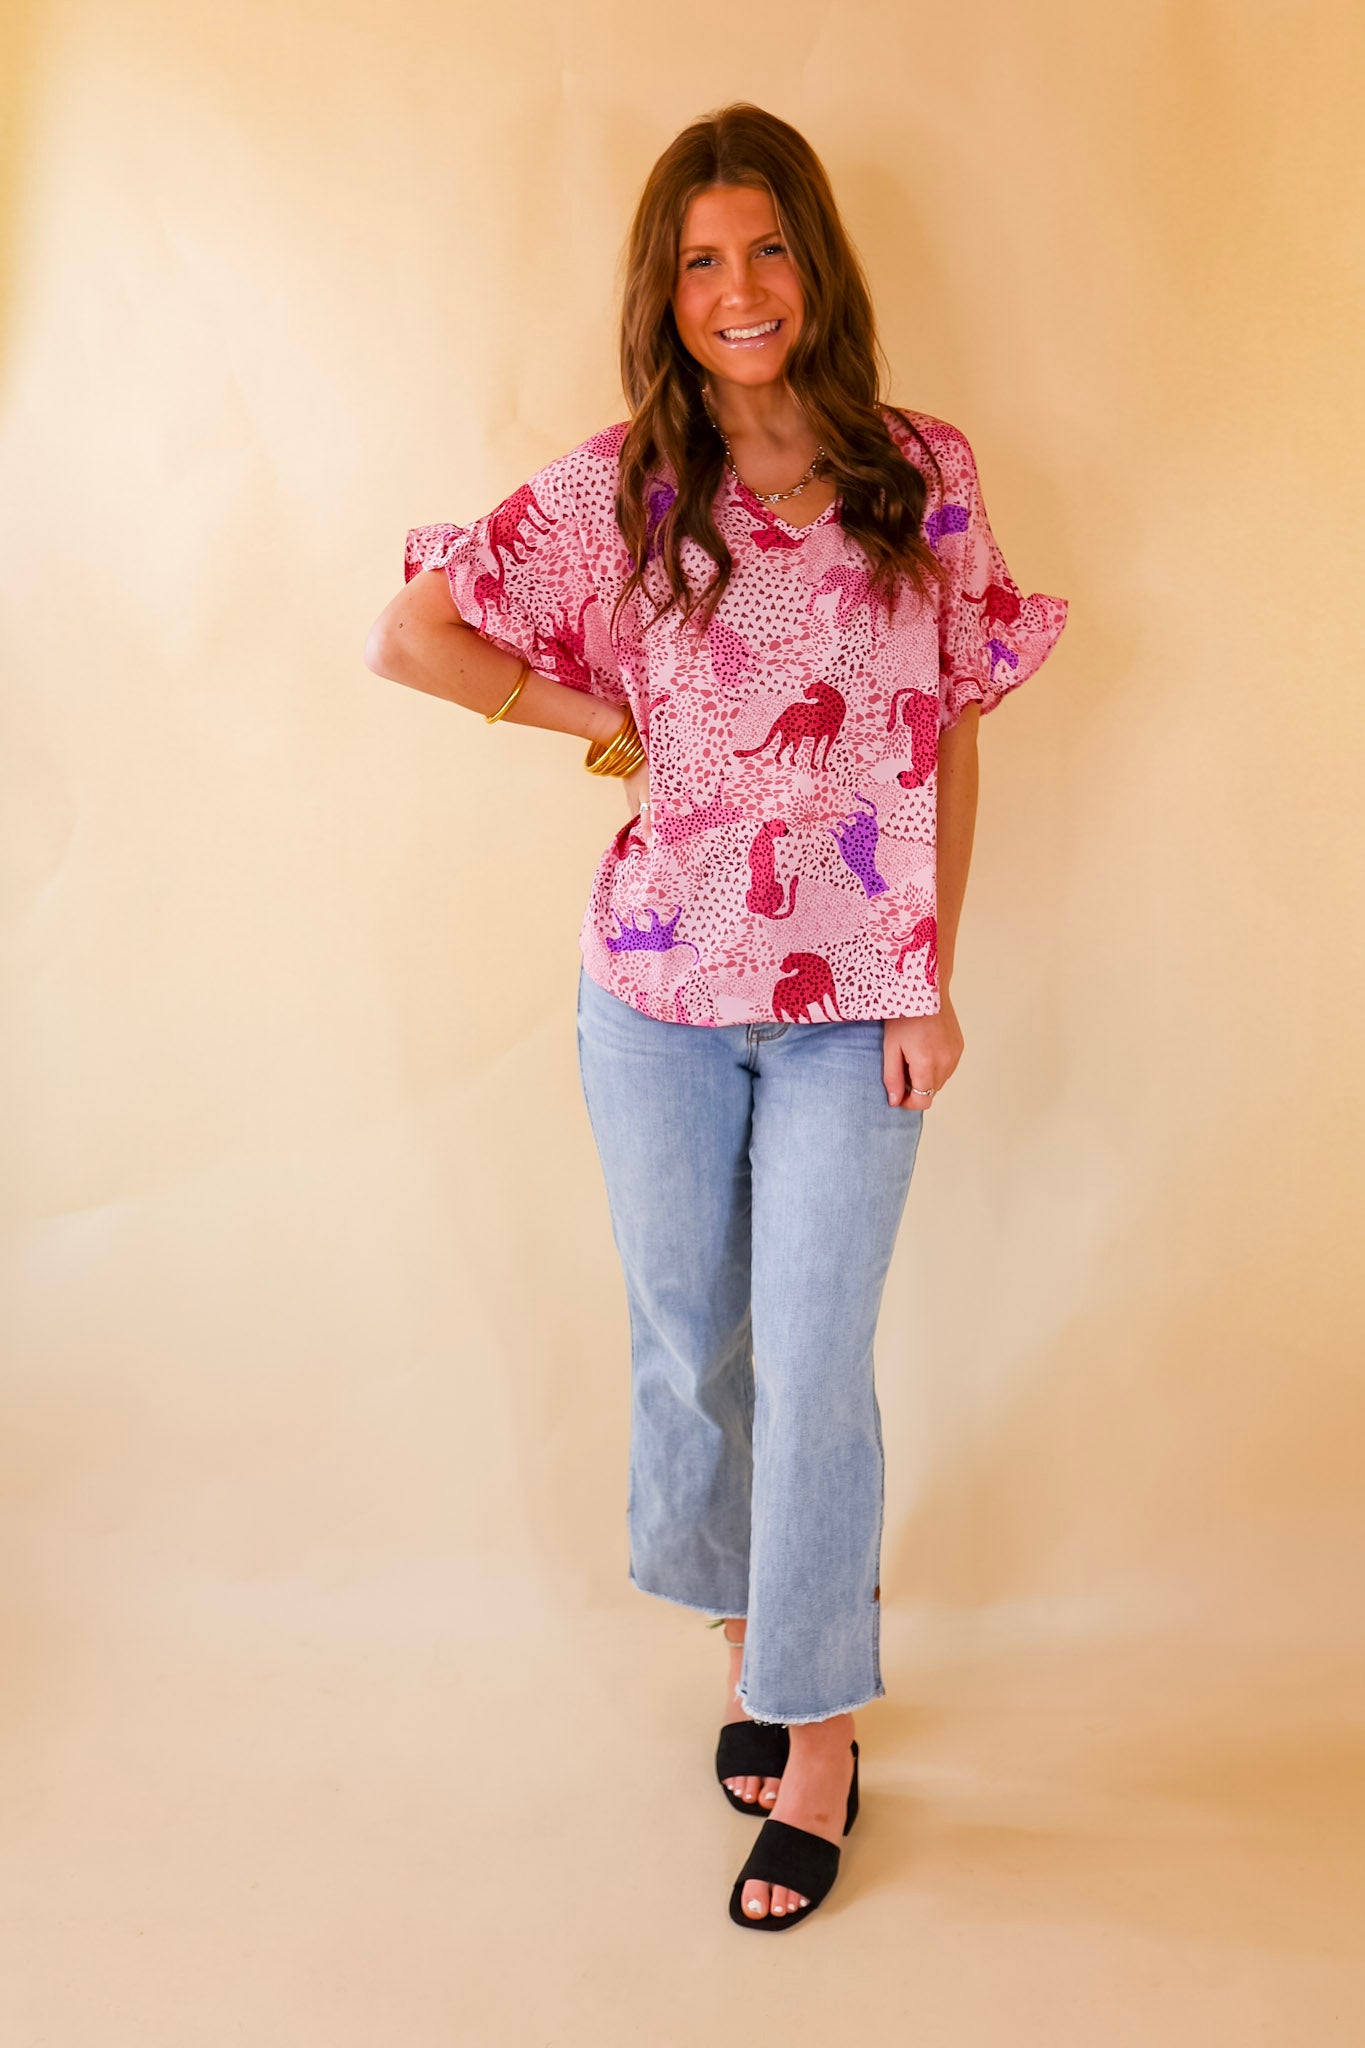 Best Version Cheetah Print V Neck Top with Ruffle Short Sleeves in Pink Mix - Giddy Up Glamour Boutique